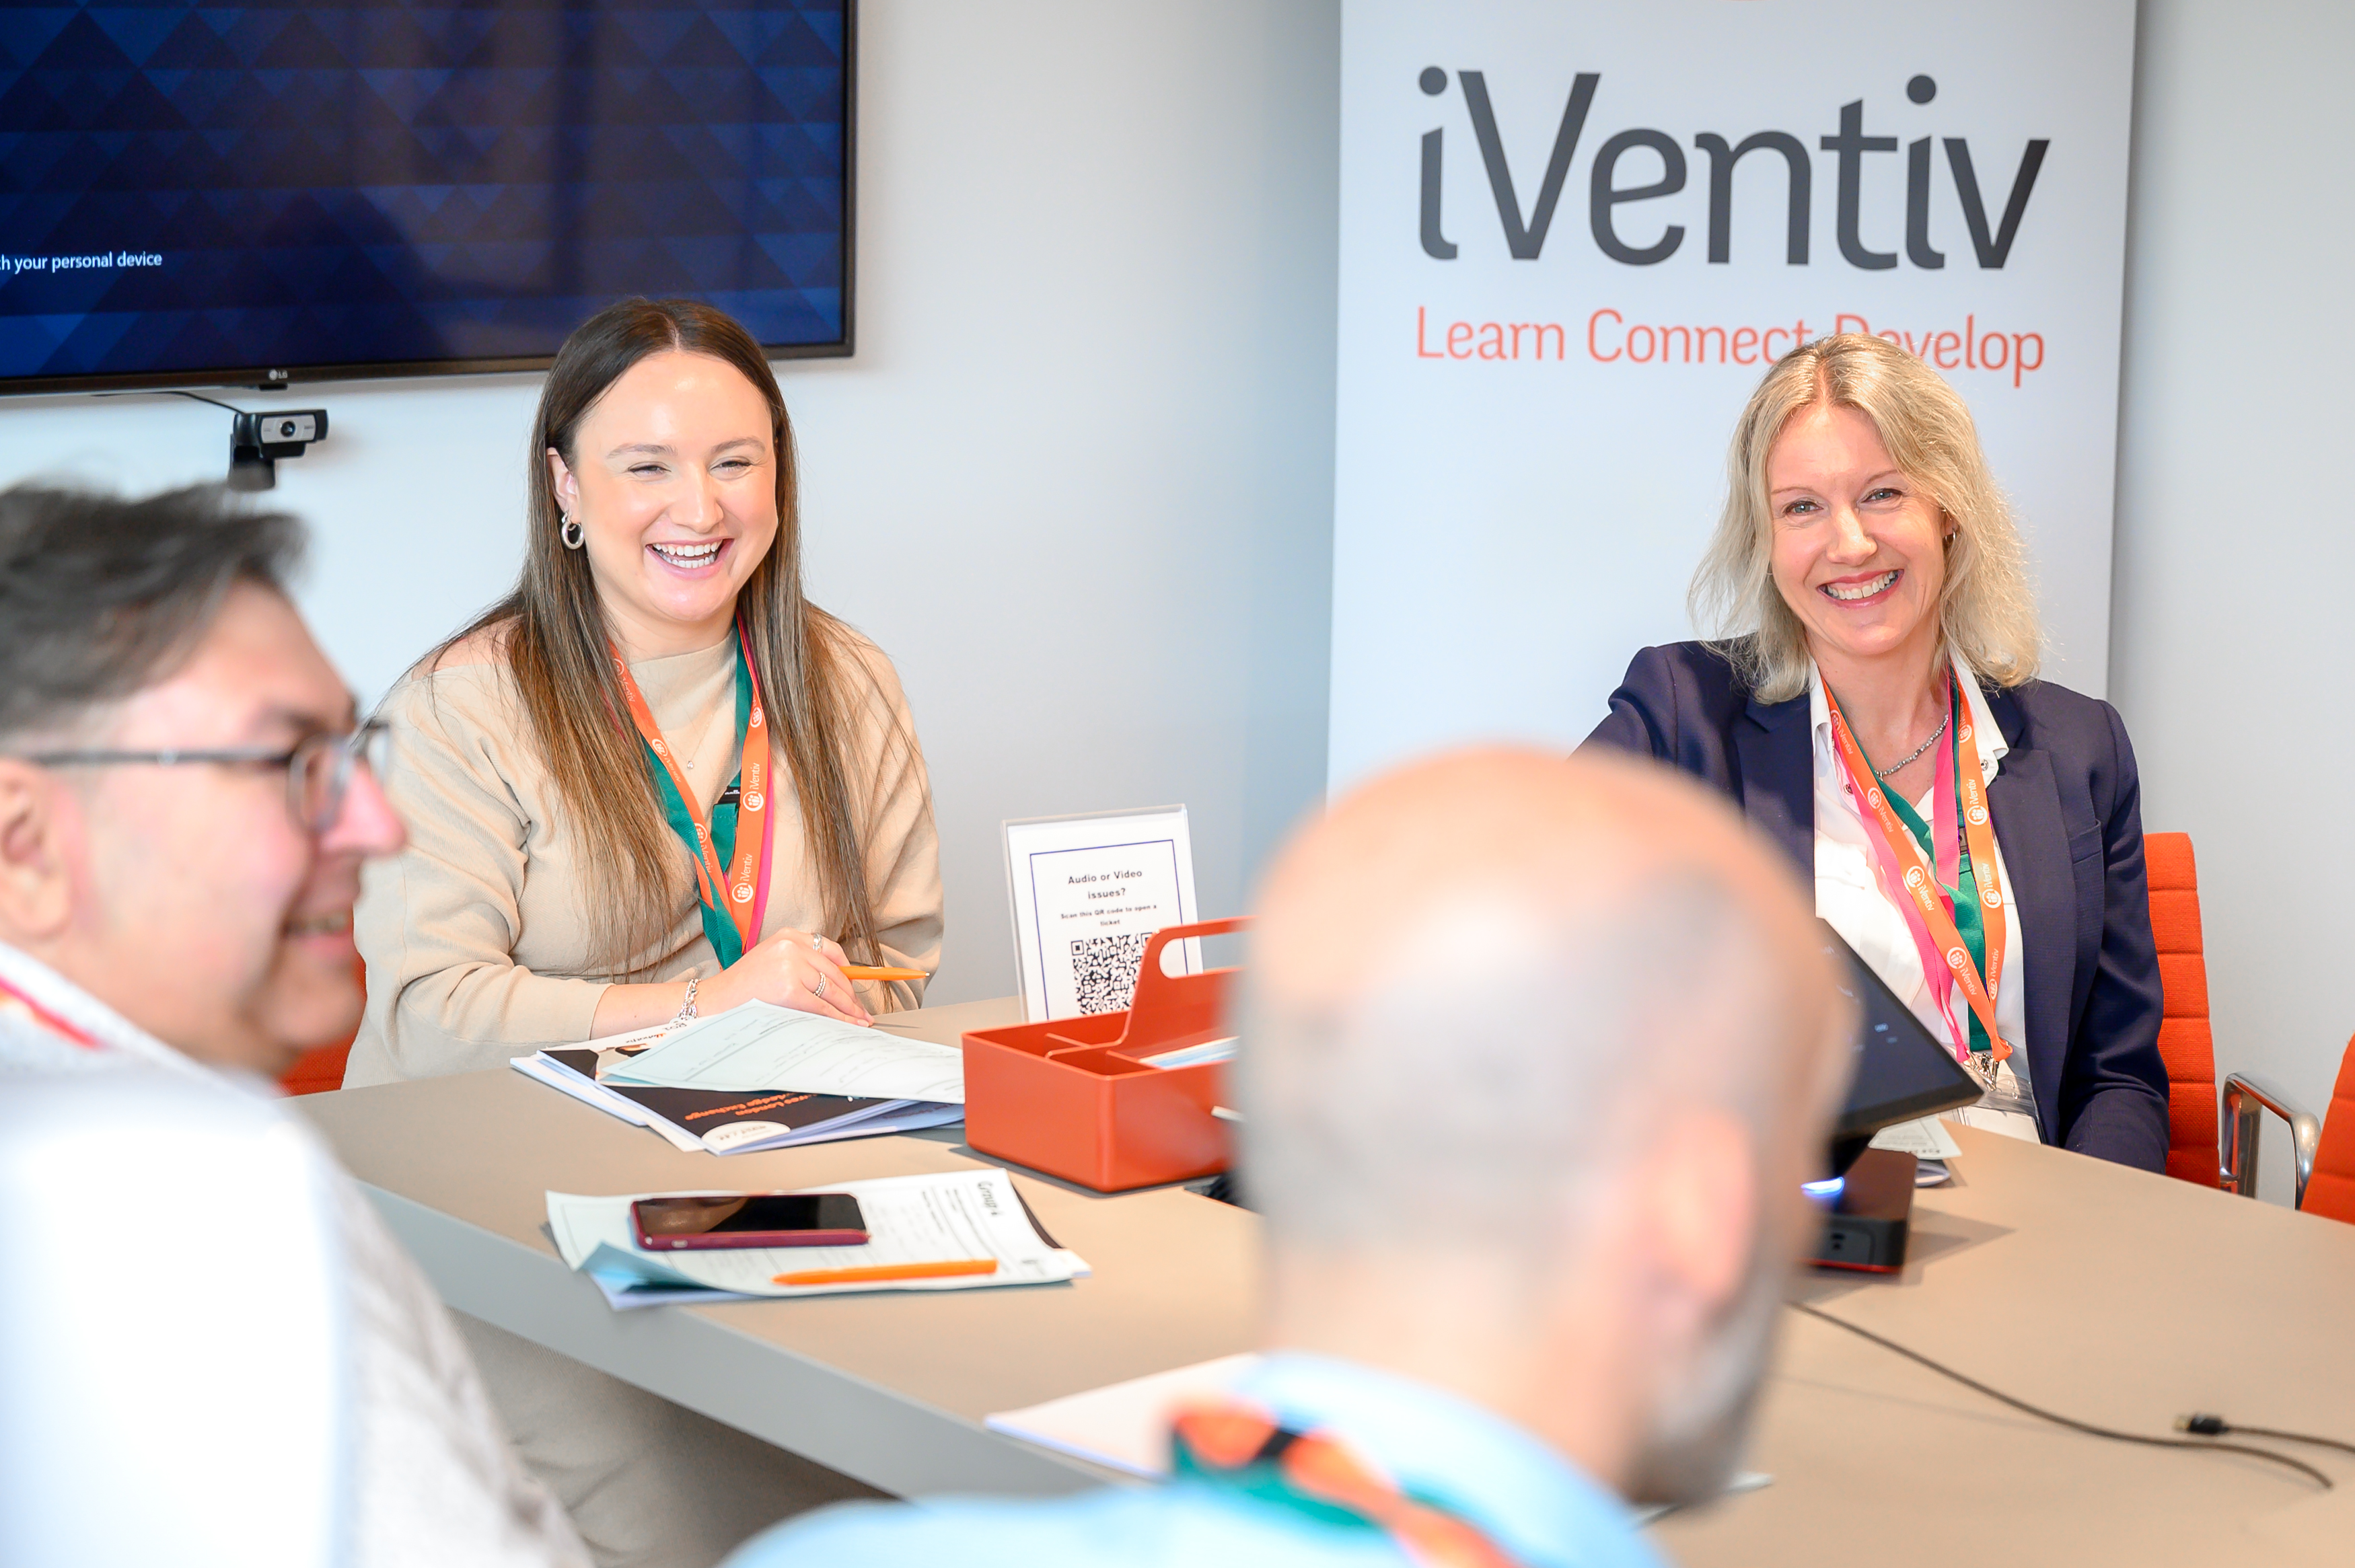 A group of people sat round a table smiling at an iVentiv event